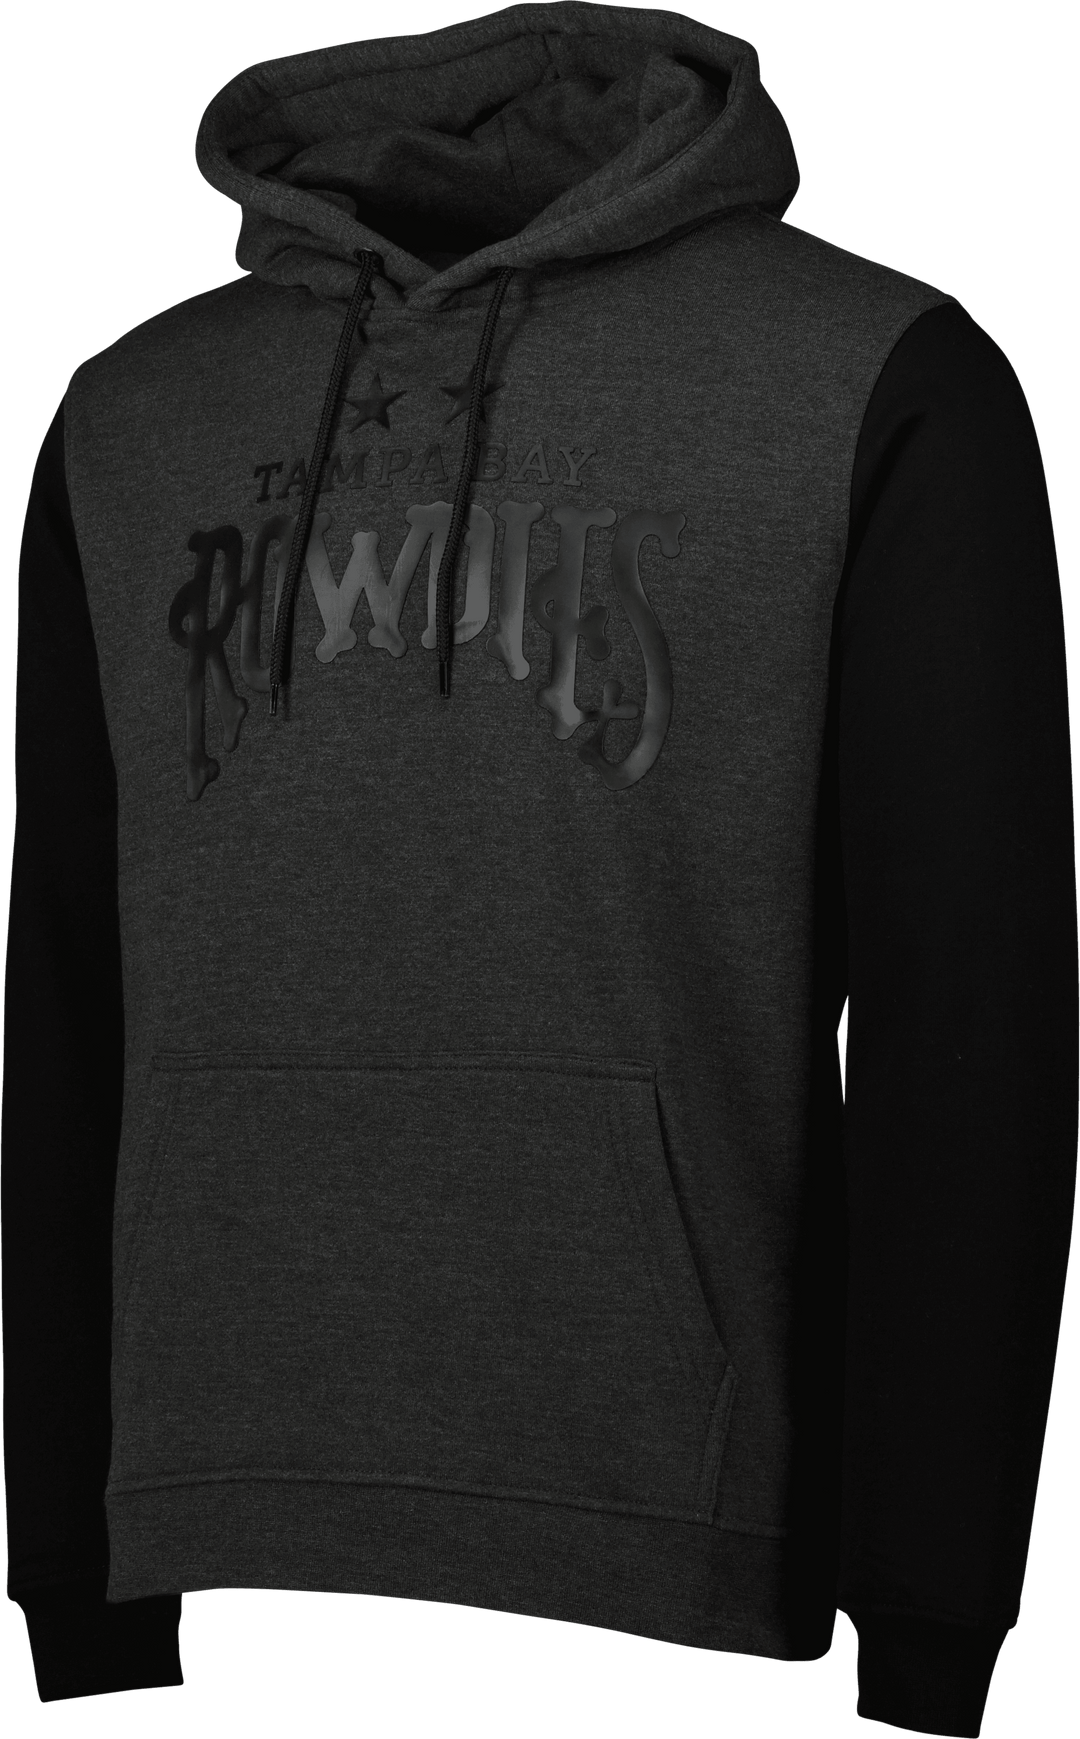 ROWDIES BLACK ON BLACK SPORT DESIGN SWEDEN PULLOVER HOODIE - The Bay Republic | Team Store of the Tampa Bay Rays & Rowdies